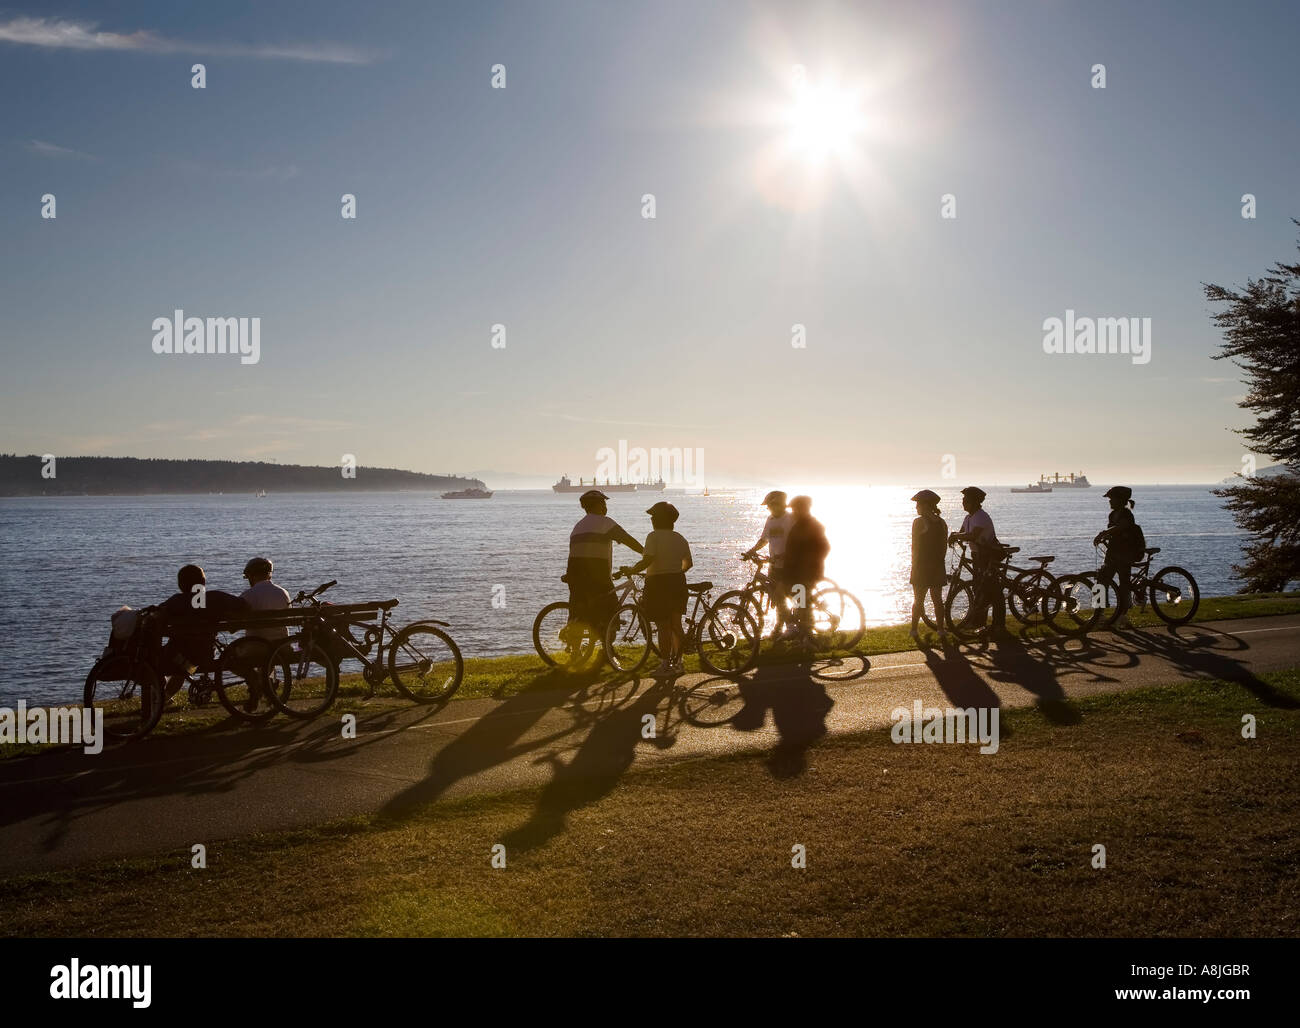 Cyclists meeting at water s edge on cycle track with shipping in distance Stanley Park Vancouver Canada Stock Photo